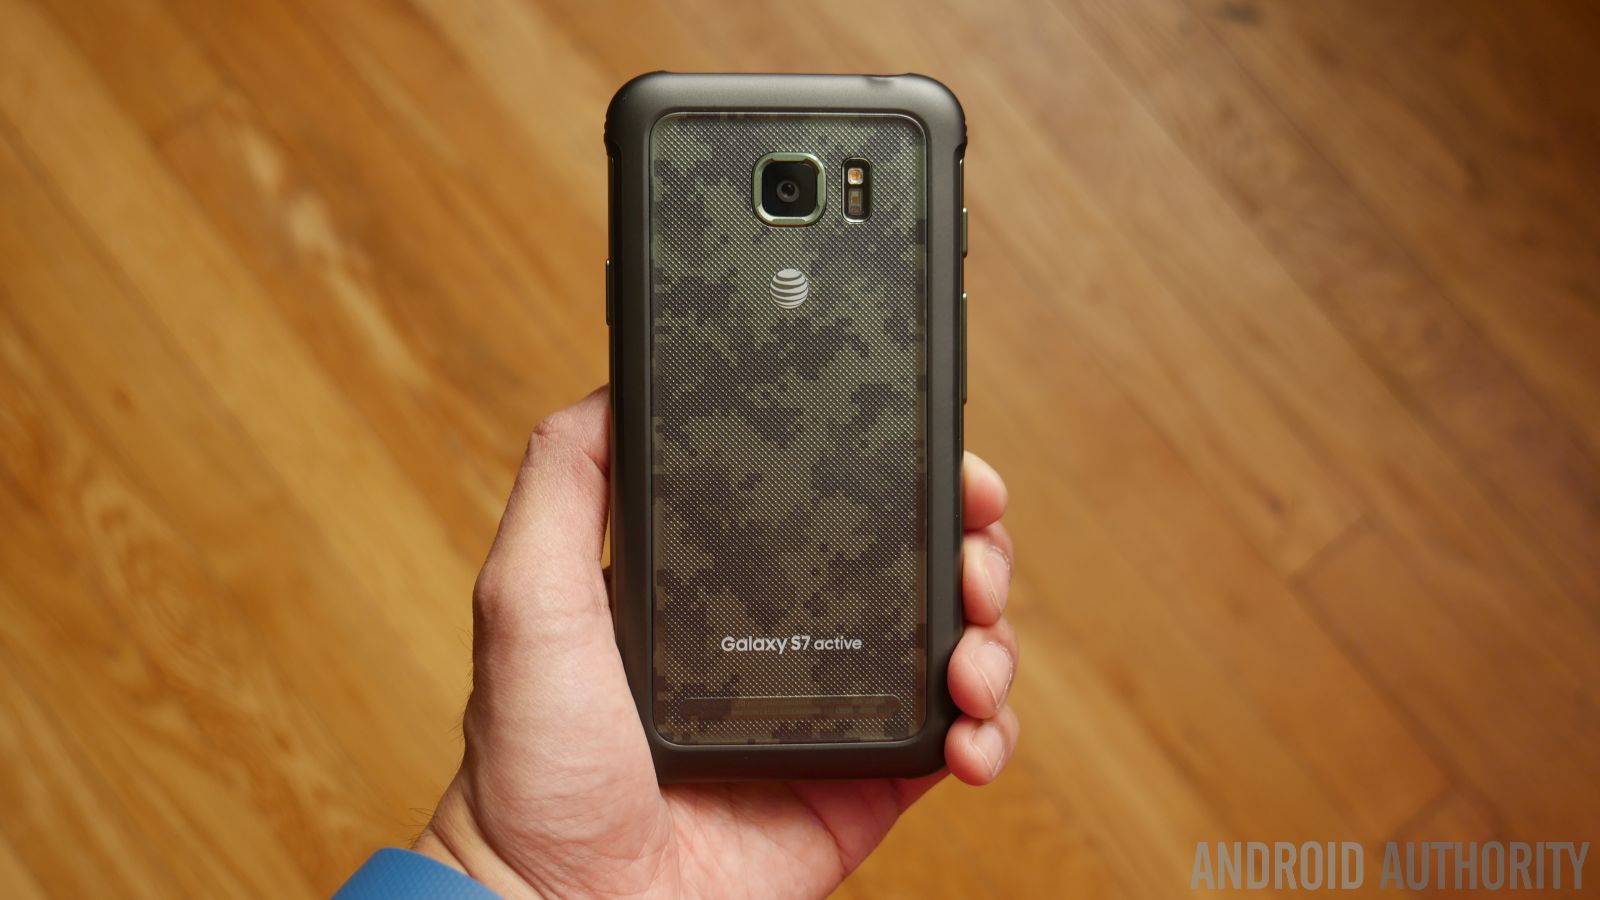 Samsung Galaxy S7 Active hands on 173